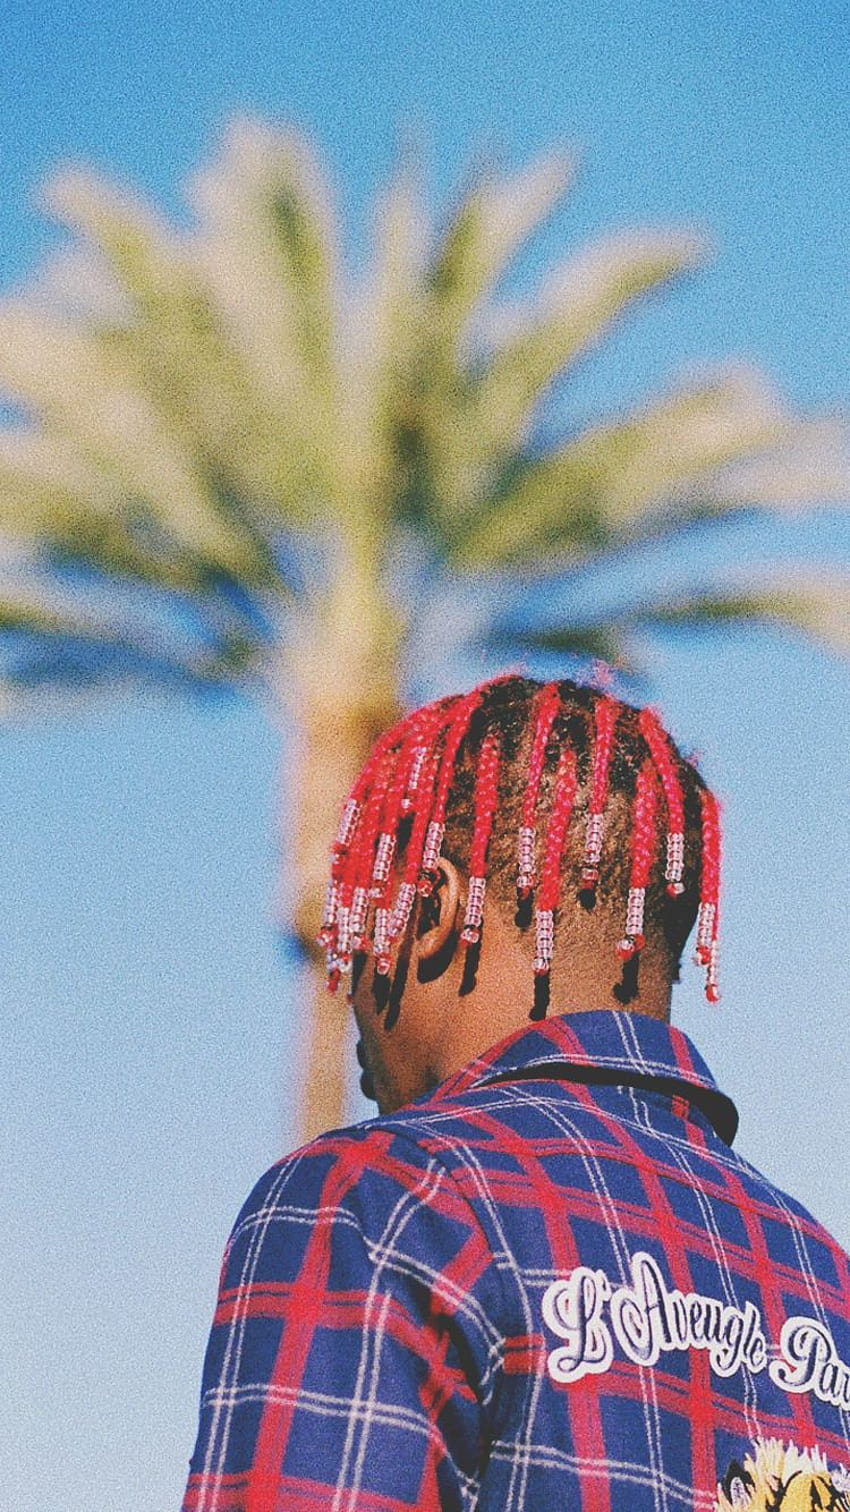 3rd Lil Yachty wallpaper  Lil yachty Photo and video Instagram photo